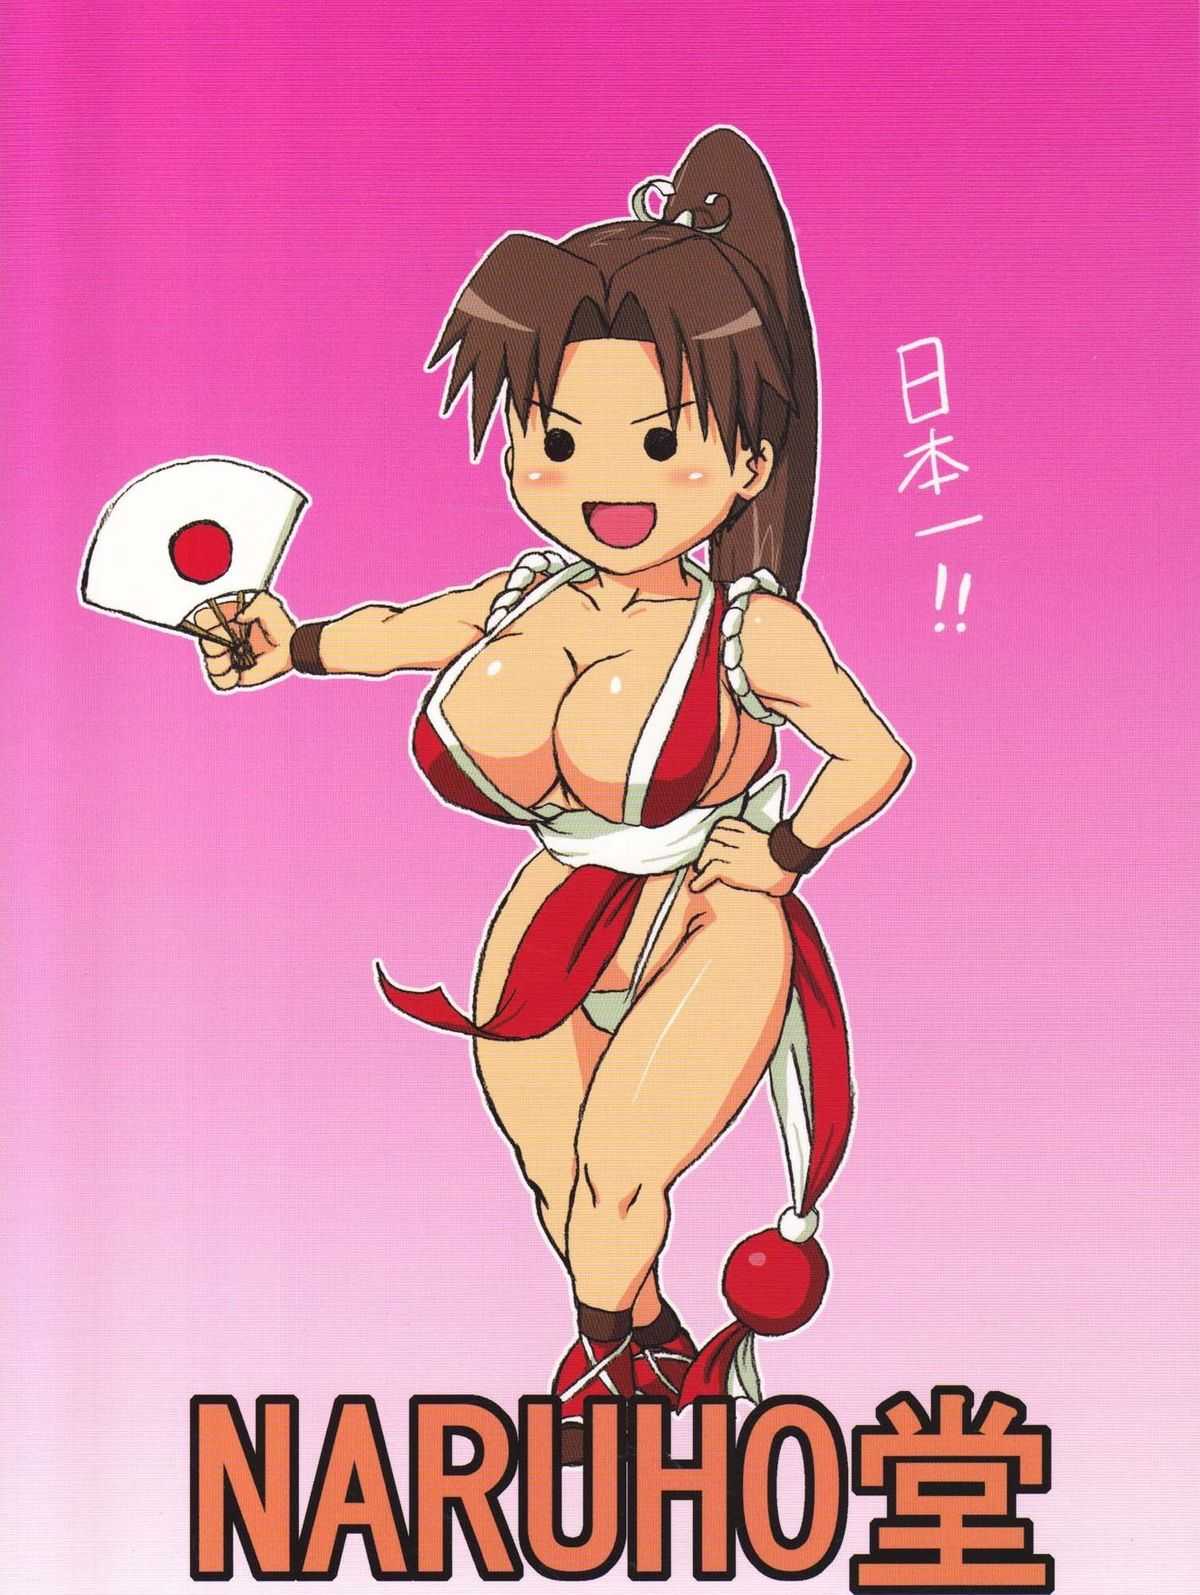 [Naruho-Dou] Mai x 3 (King of Fighters) [English] マイ&times;3